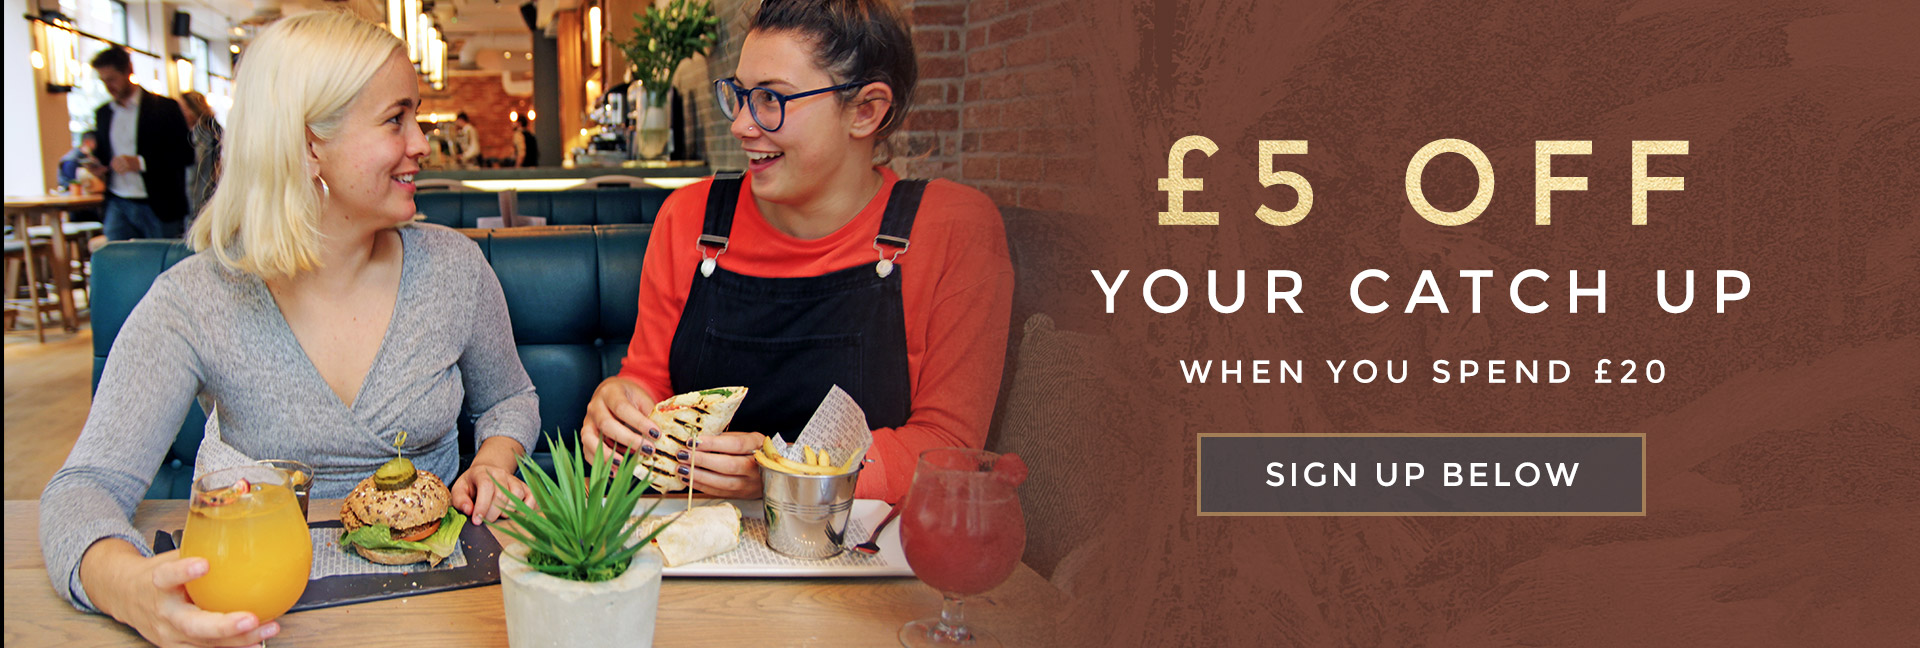 £5 off your next catch-up - When you spend £20 on food and drink